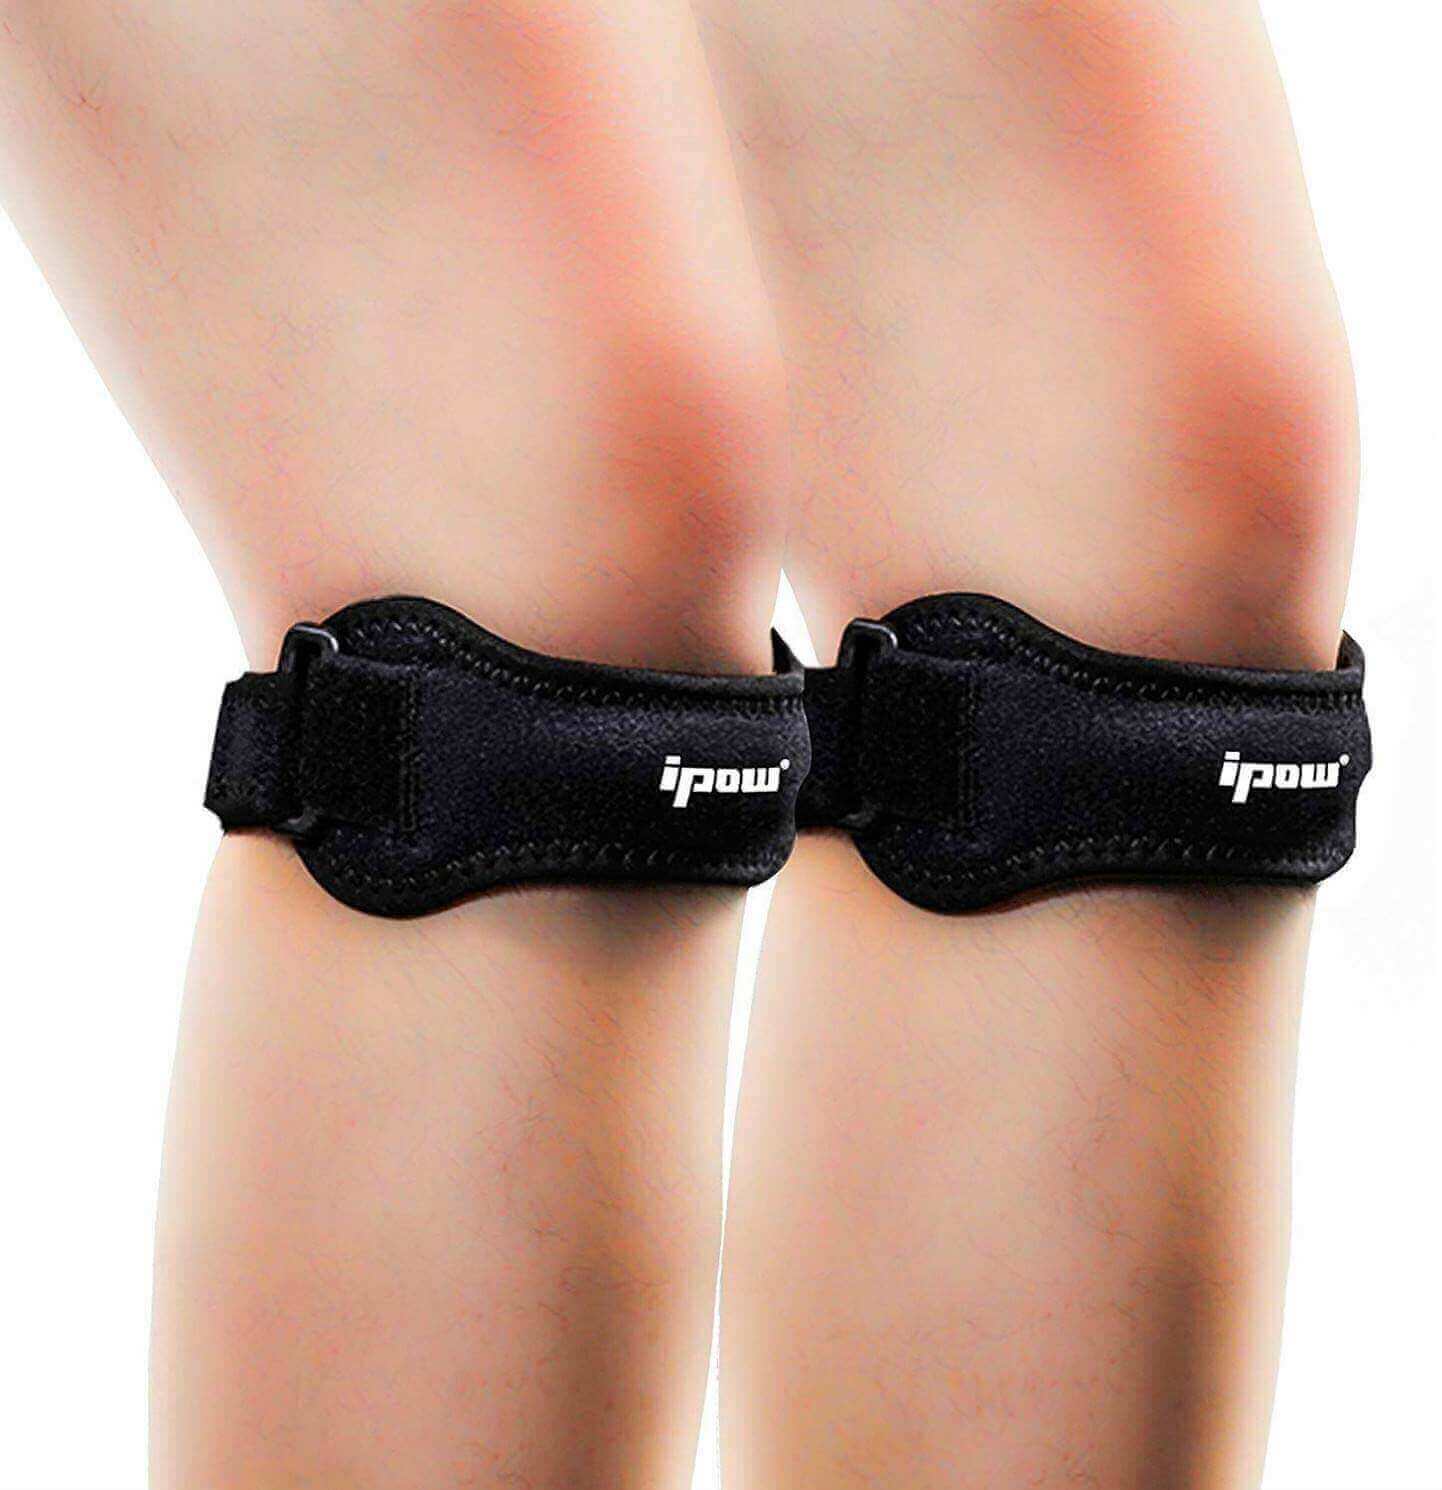 A black knee brace for volleyball with adjustable straps and a cushioned pad for extra support and protection during intense matches